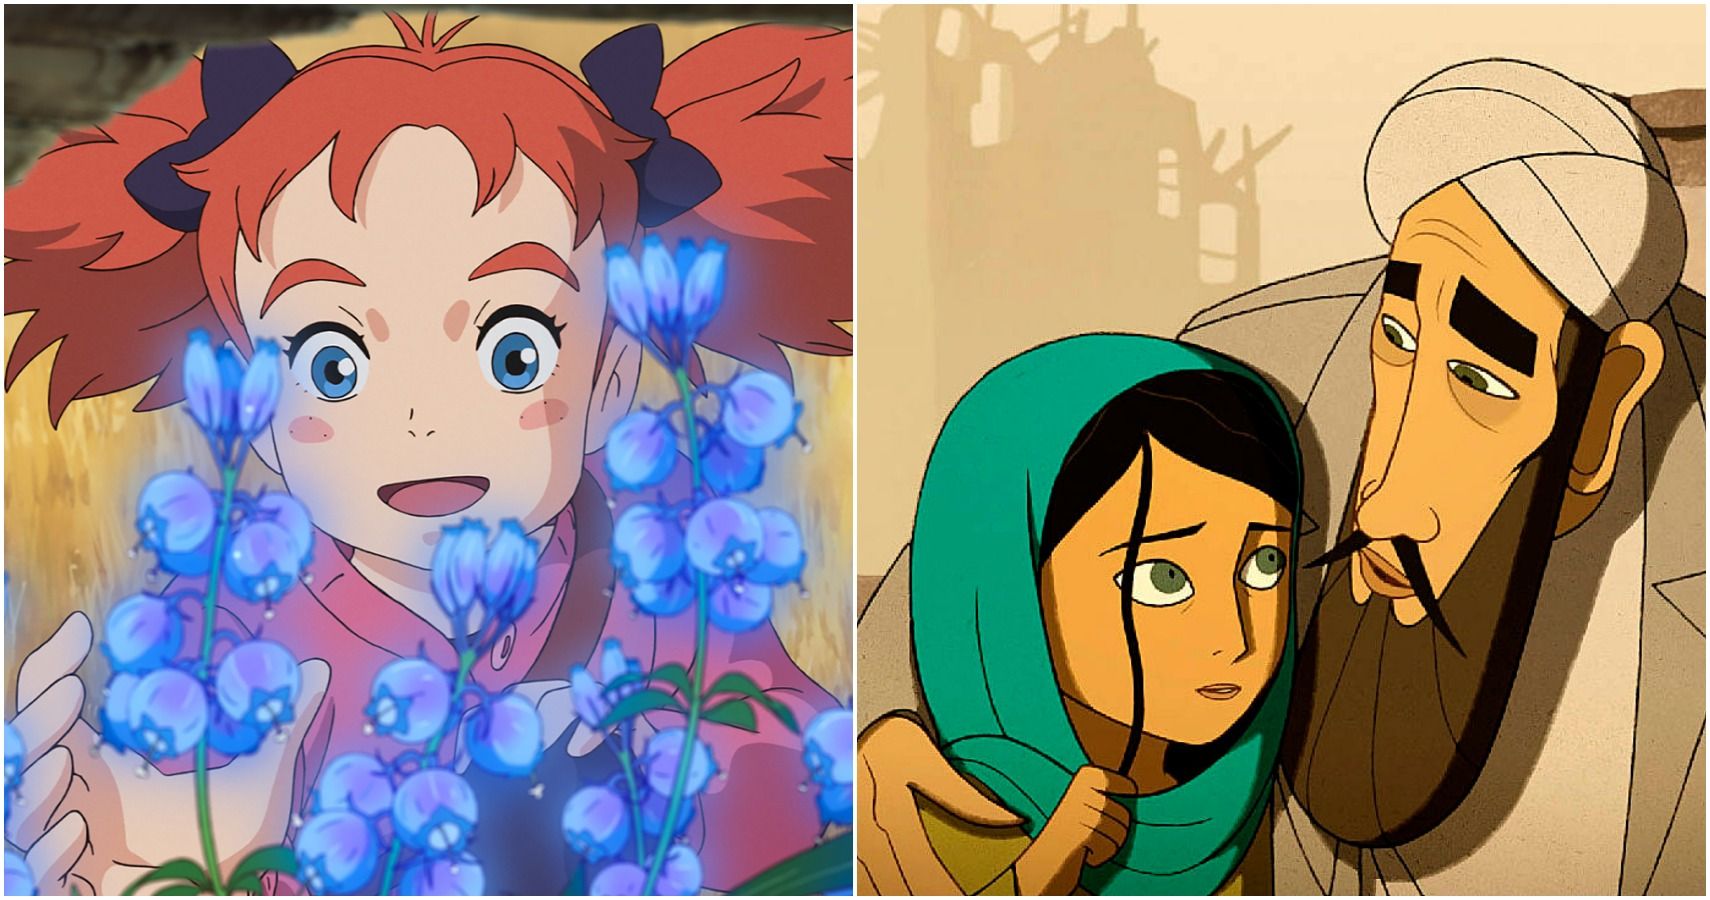 10 Best Animated Films On Netflix (According To Rotten Tomatoes)